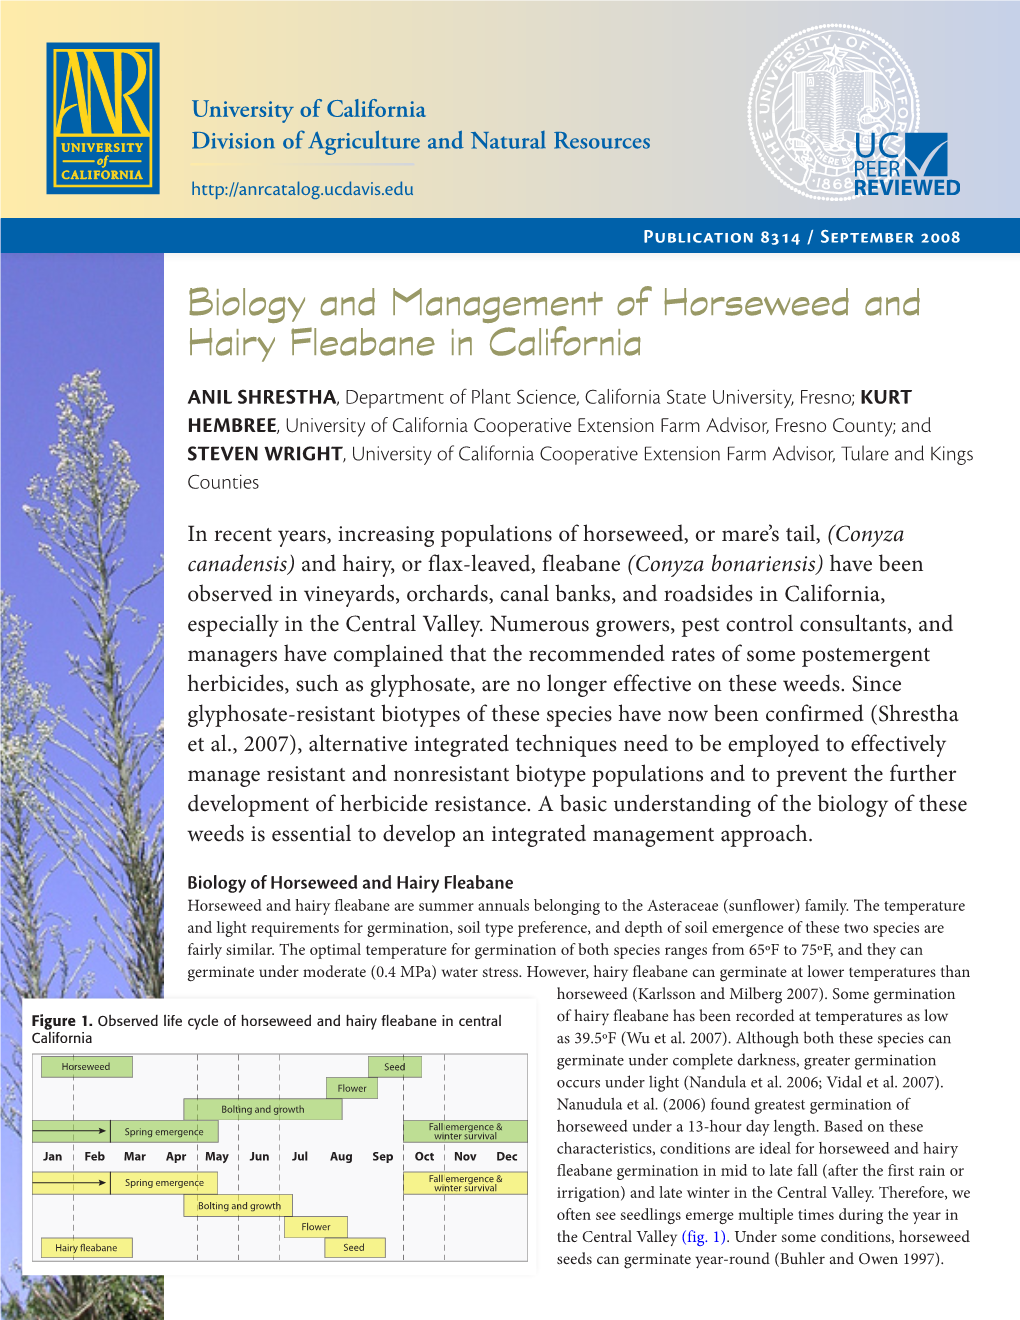 Biology and Management of Horseweed and Hairy Fleabane in California